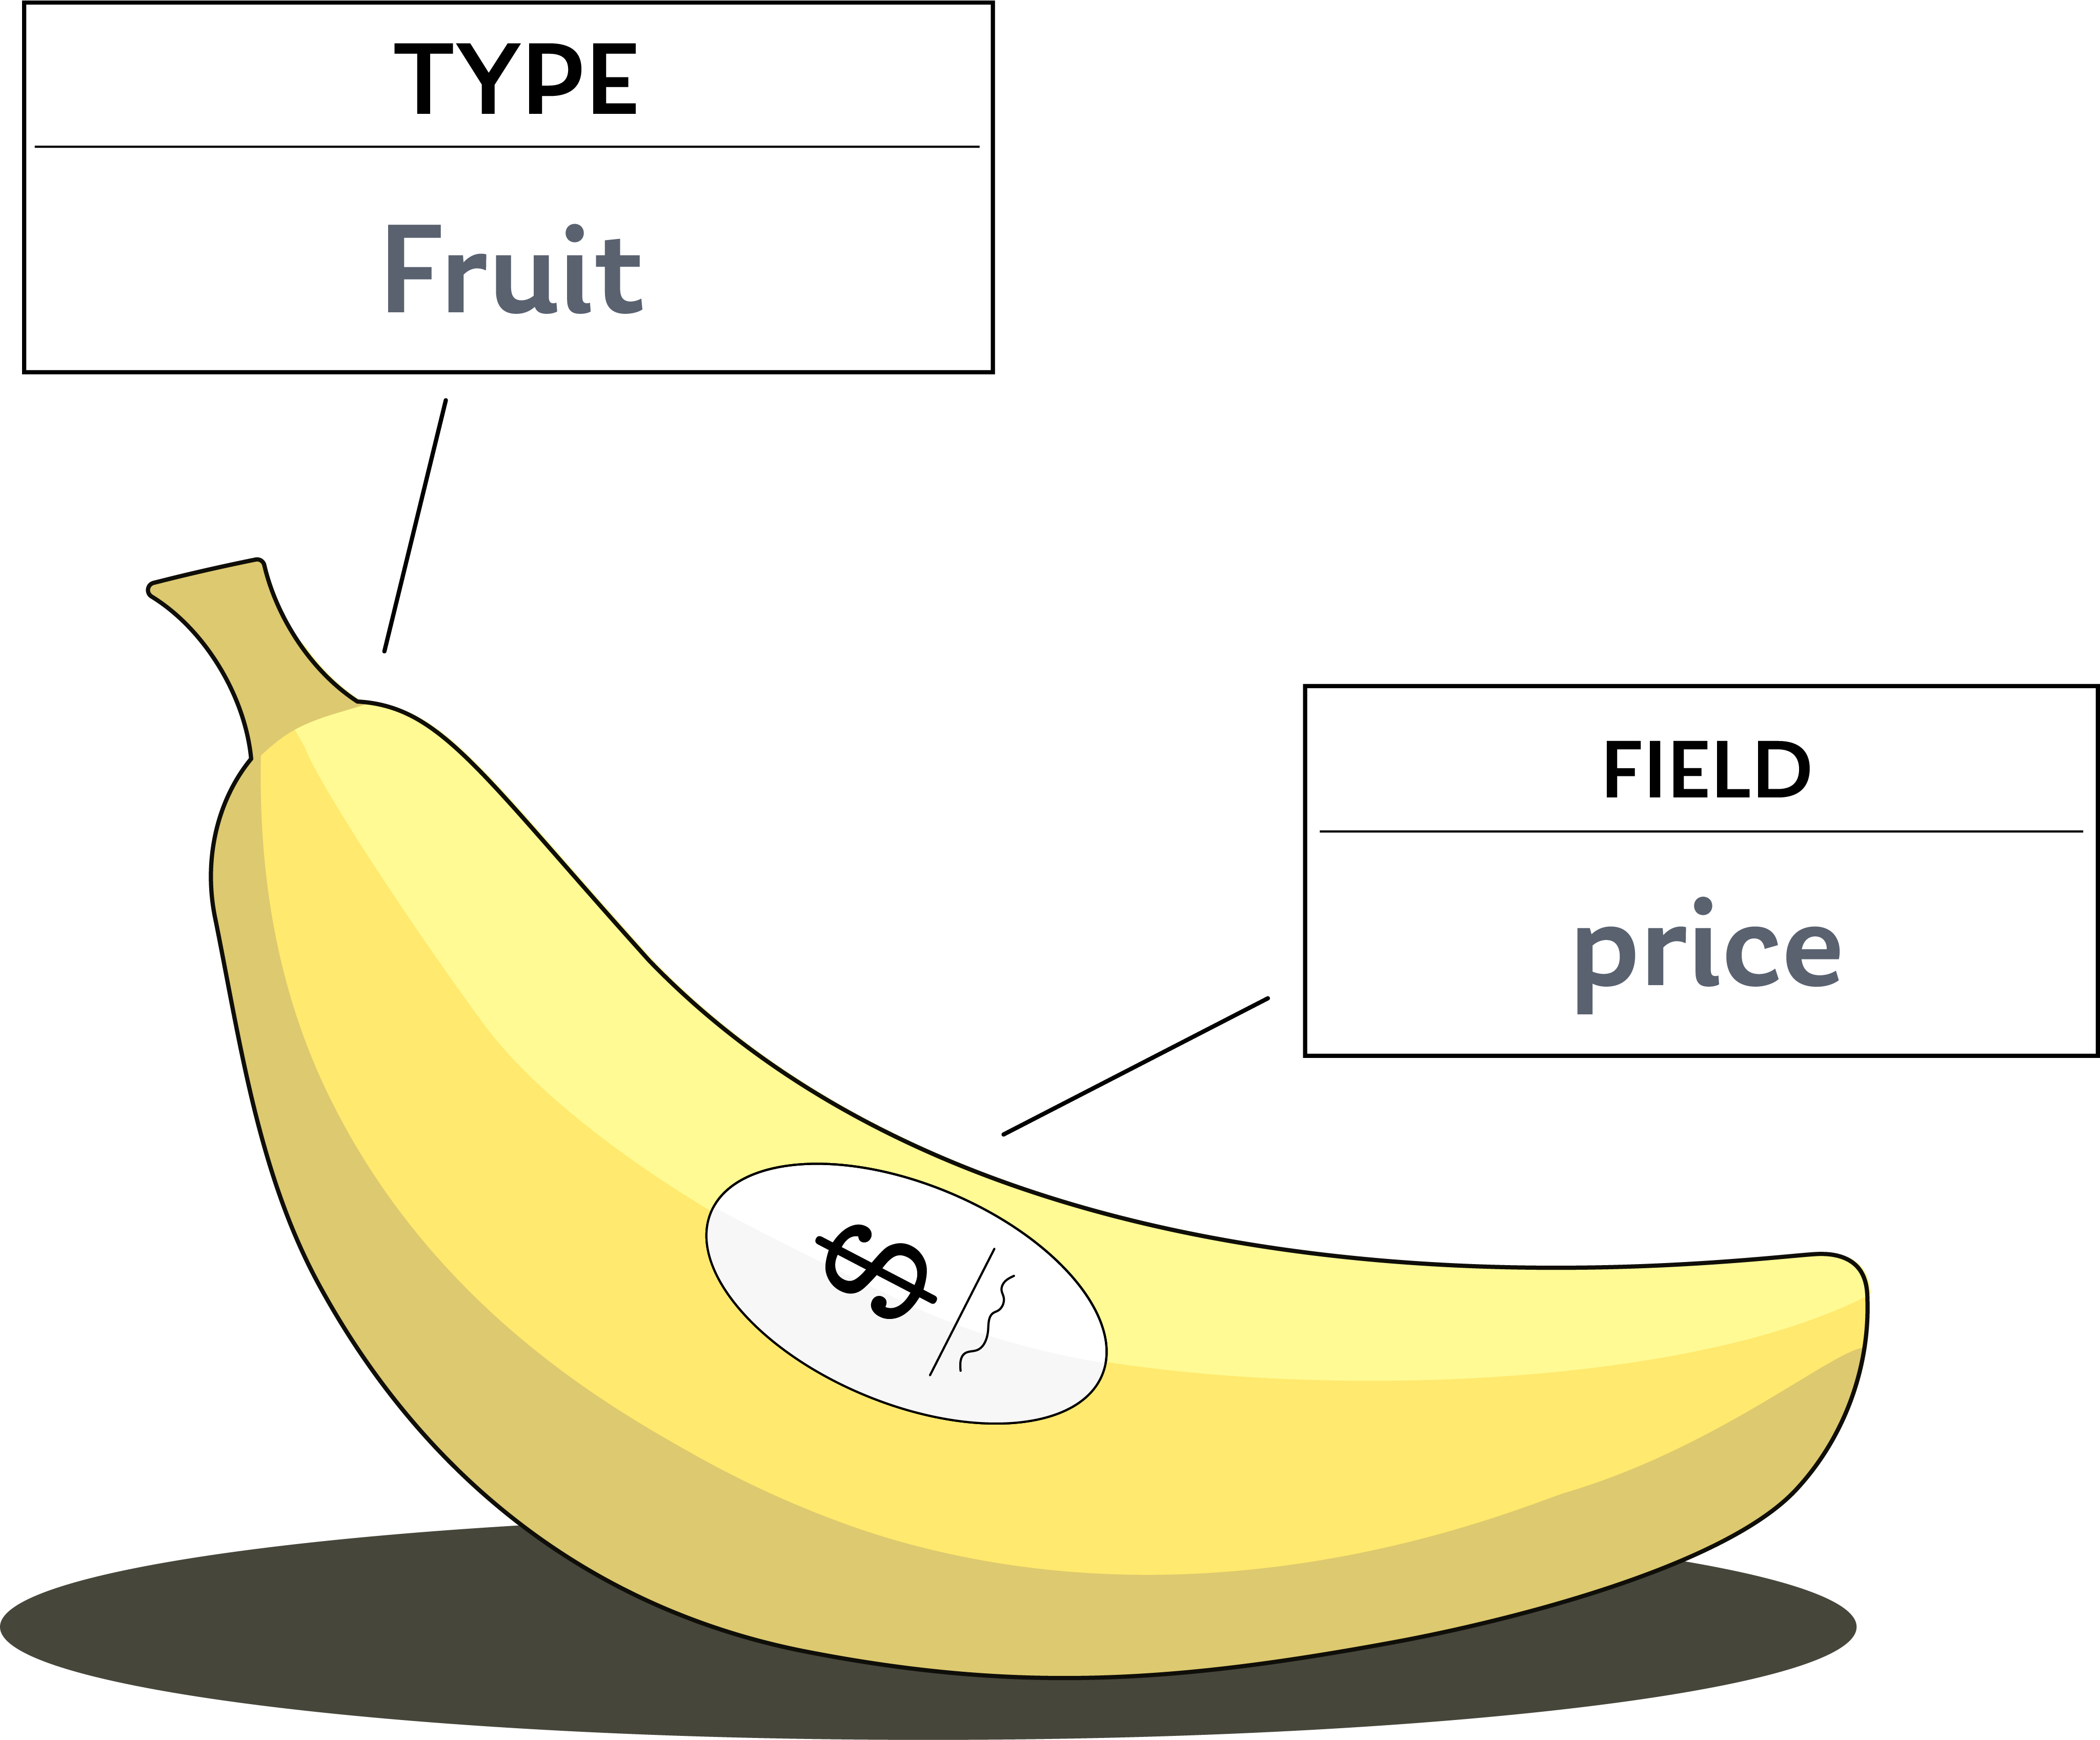 A banana accompanied by two labels, one indicating it's a Fruit type, the other that it has a field called price.